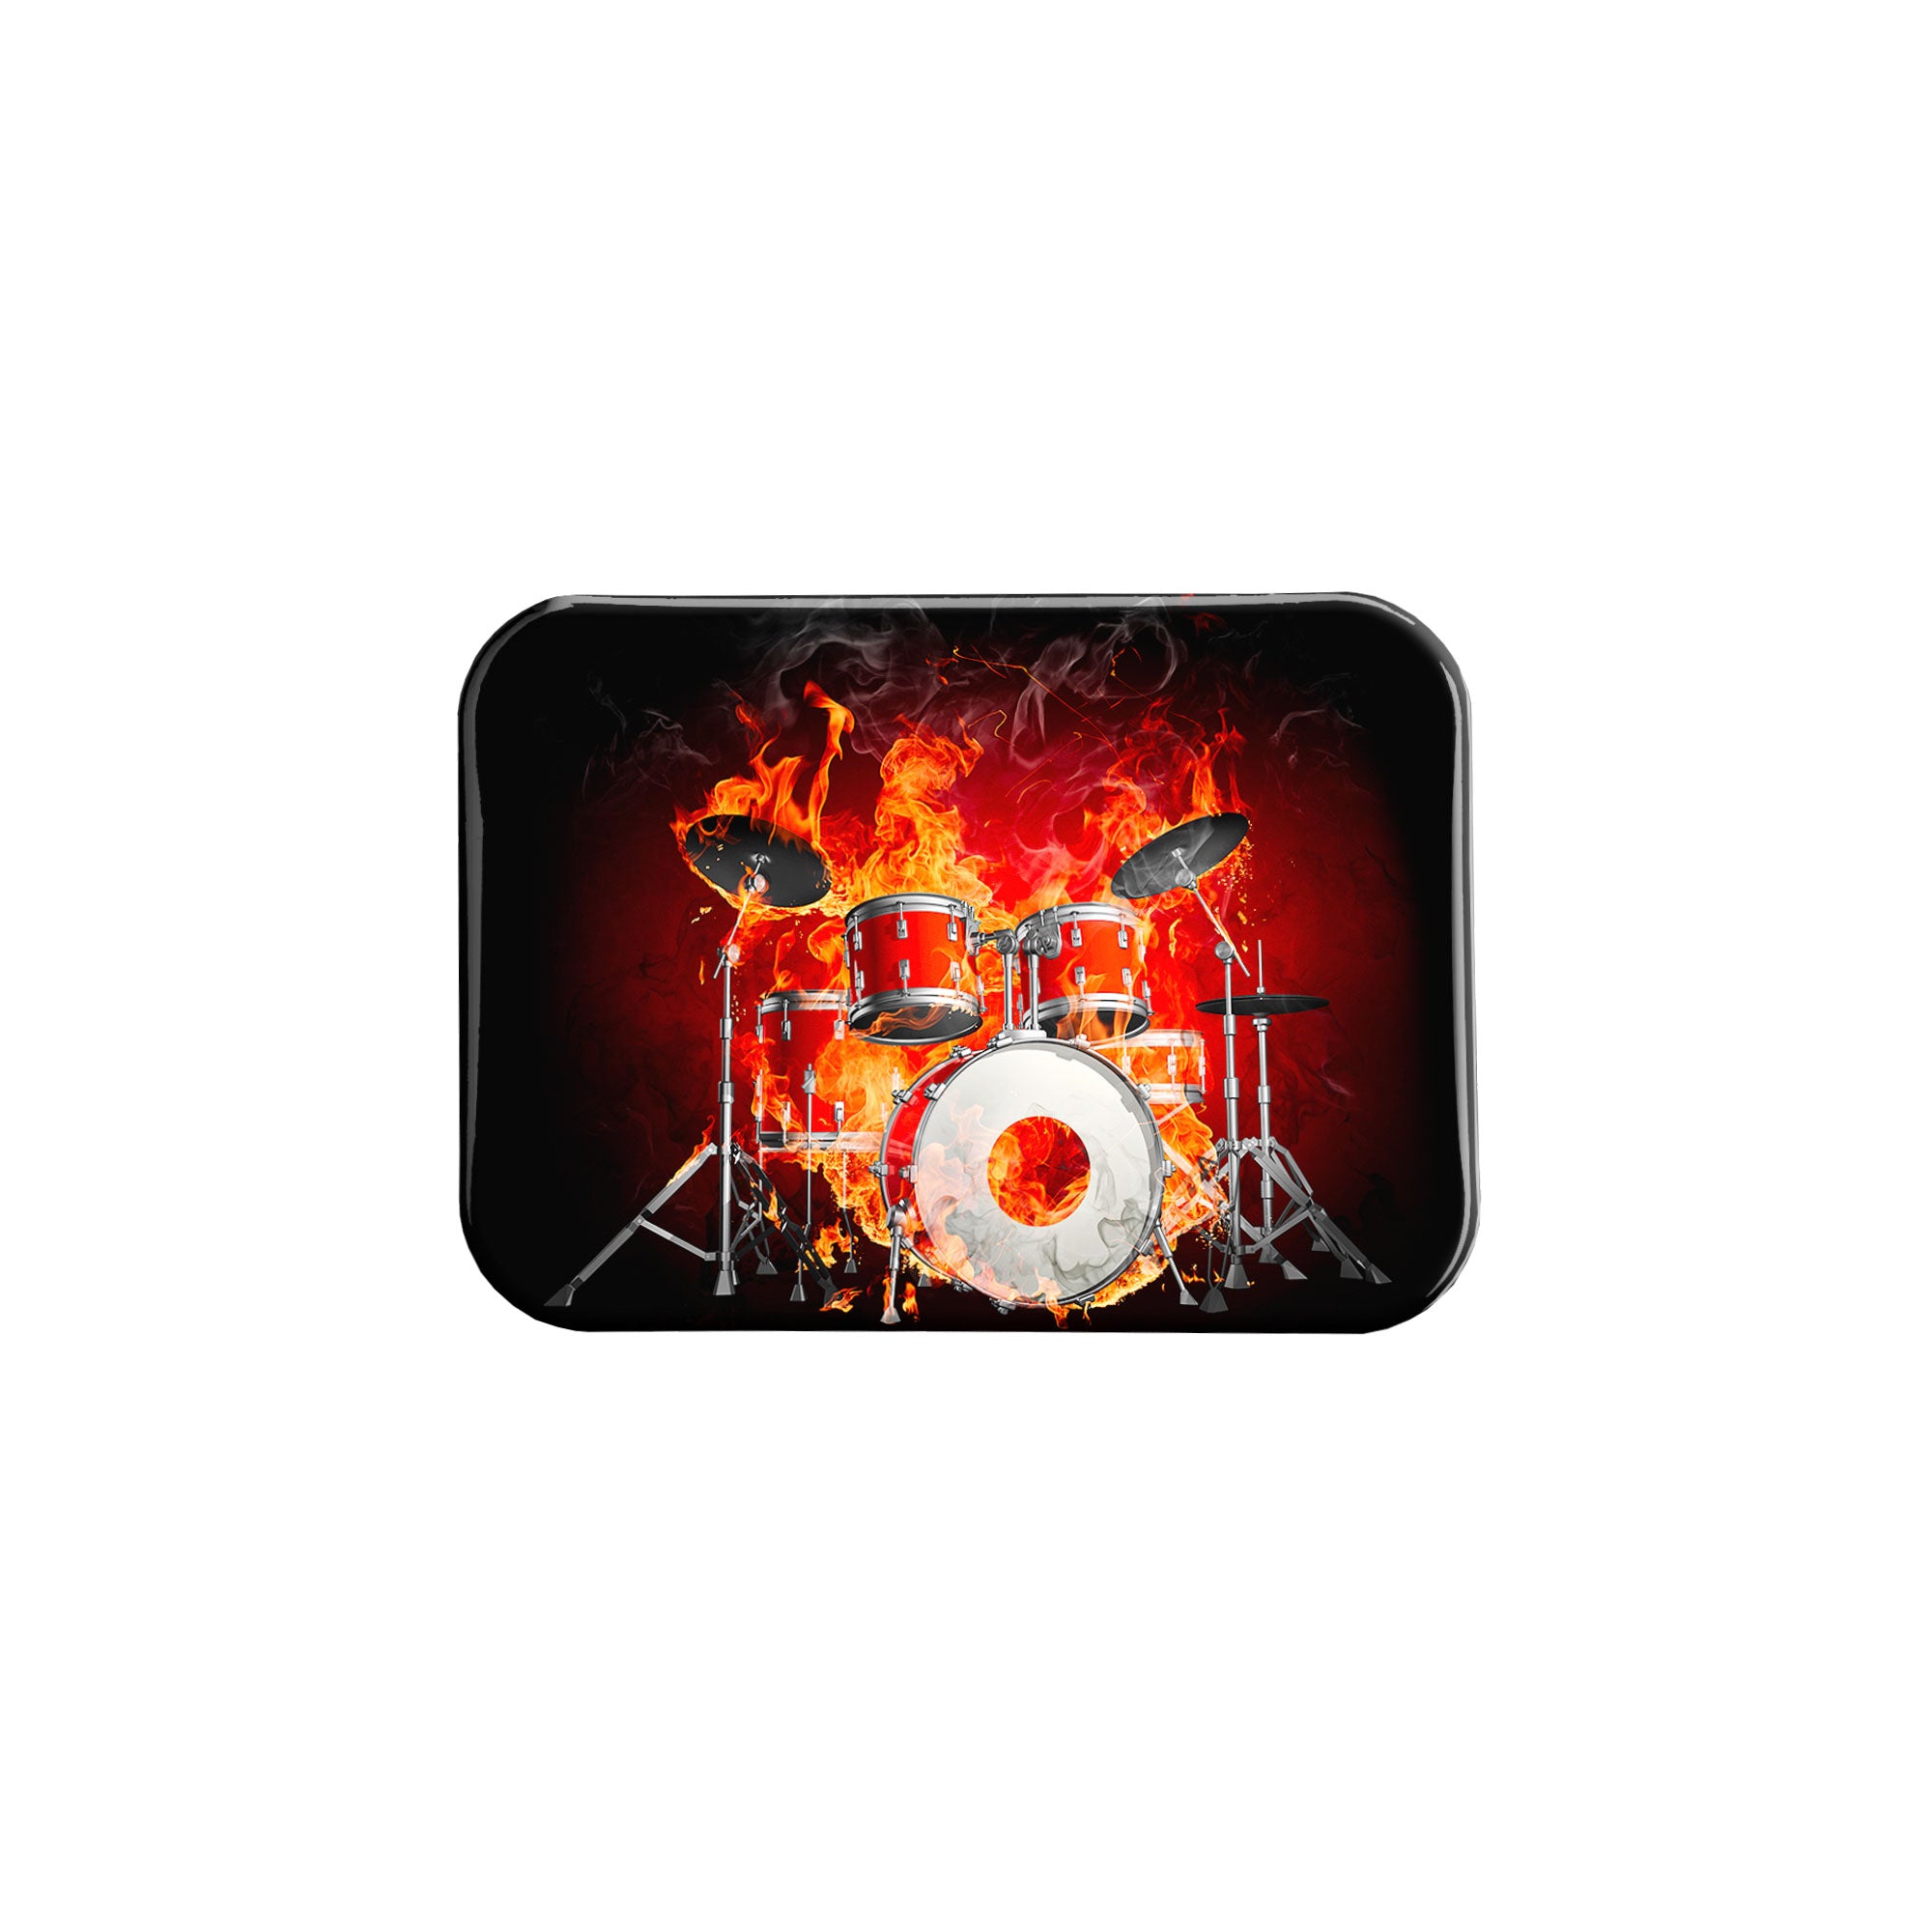 "Drums on Fire" - 2.5" X 3.5" Rectangle Fridge Magnets